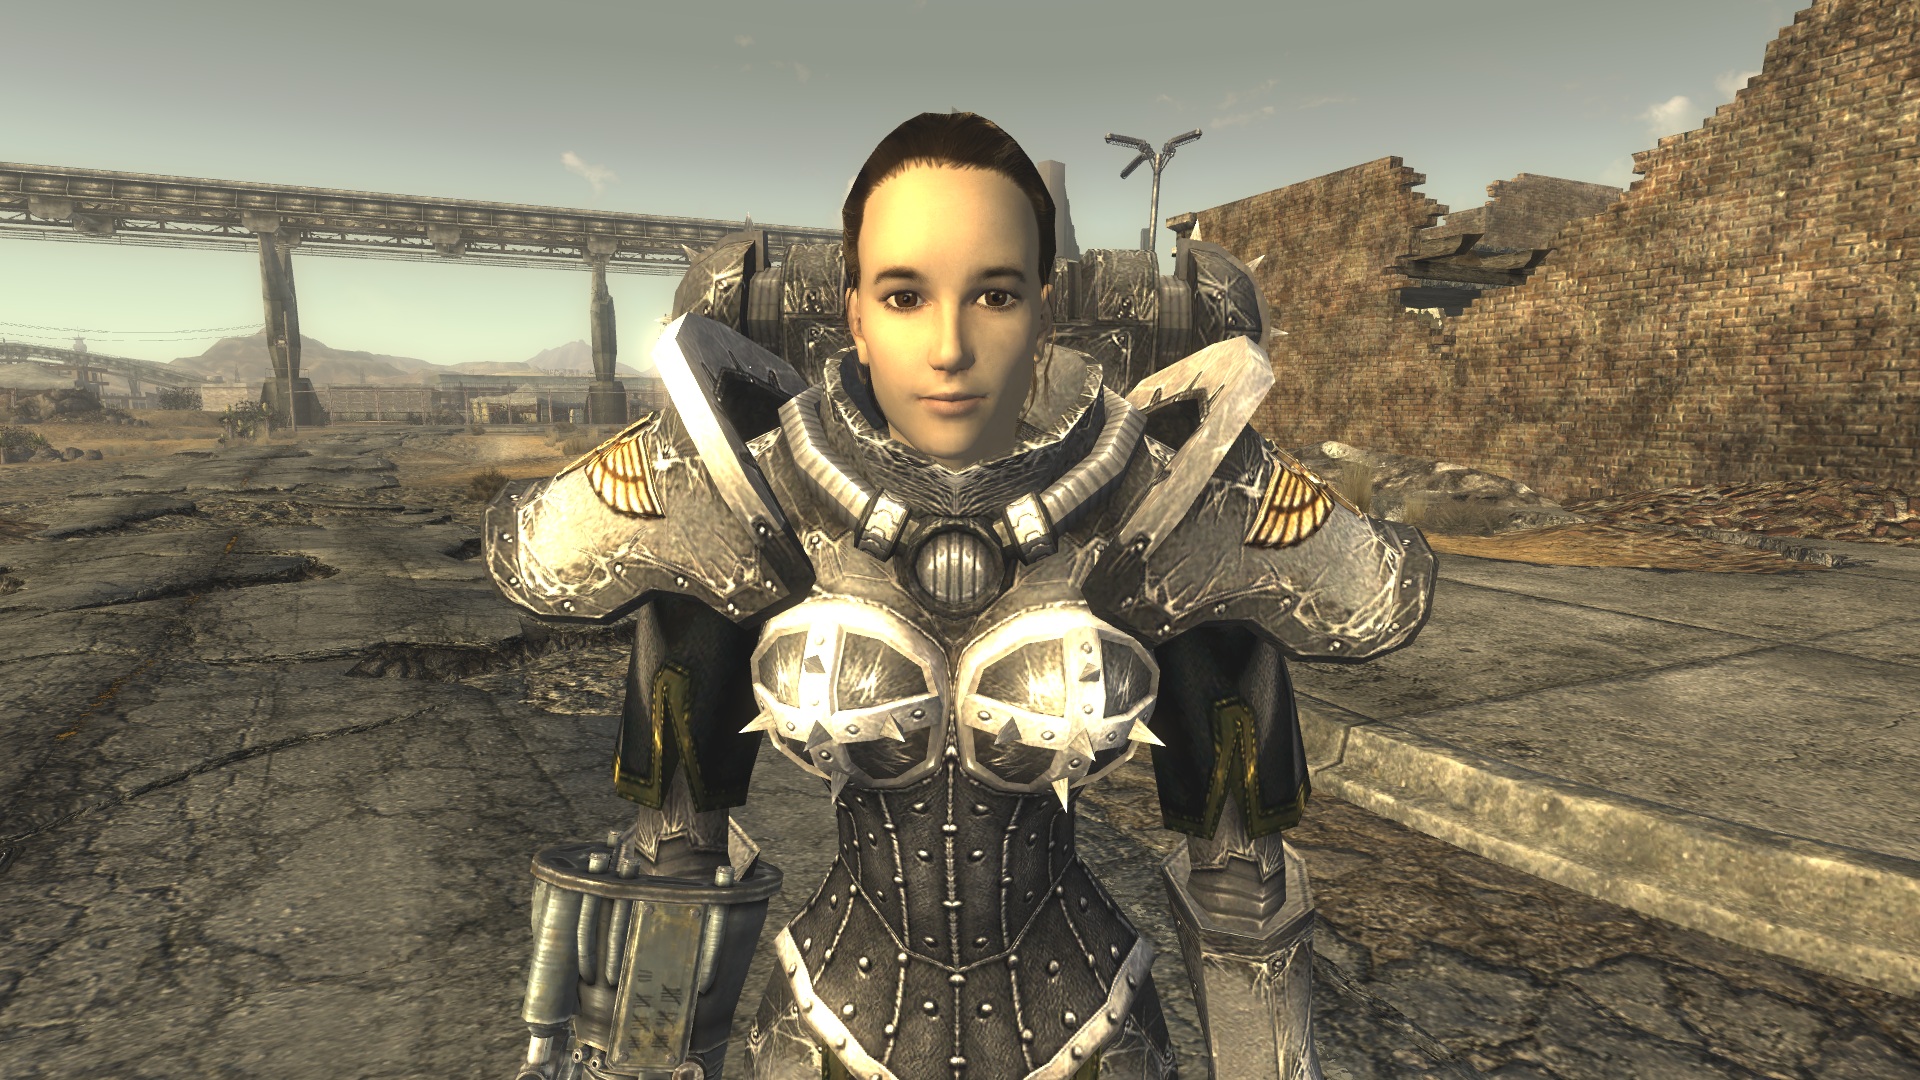 Veronica Looking Nice! image - Warhammer 40k Conversion mod for Fallout: Ne...